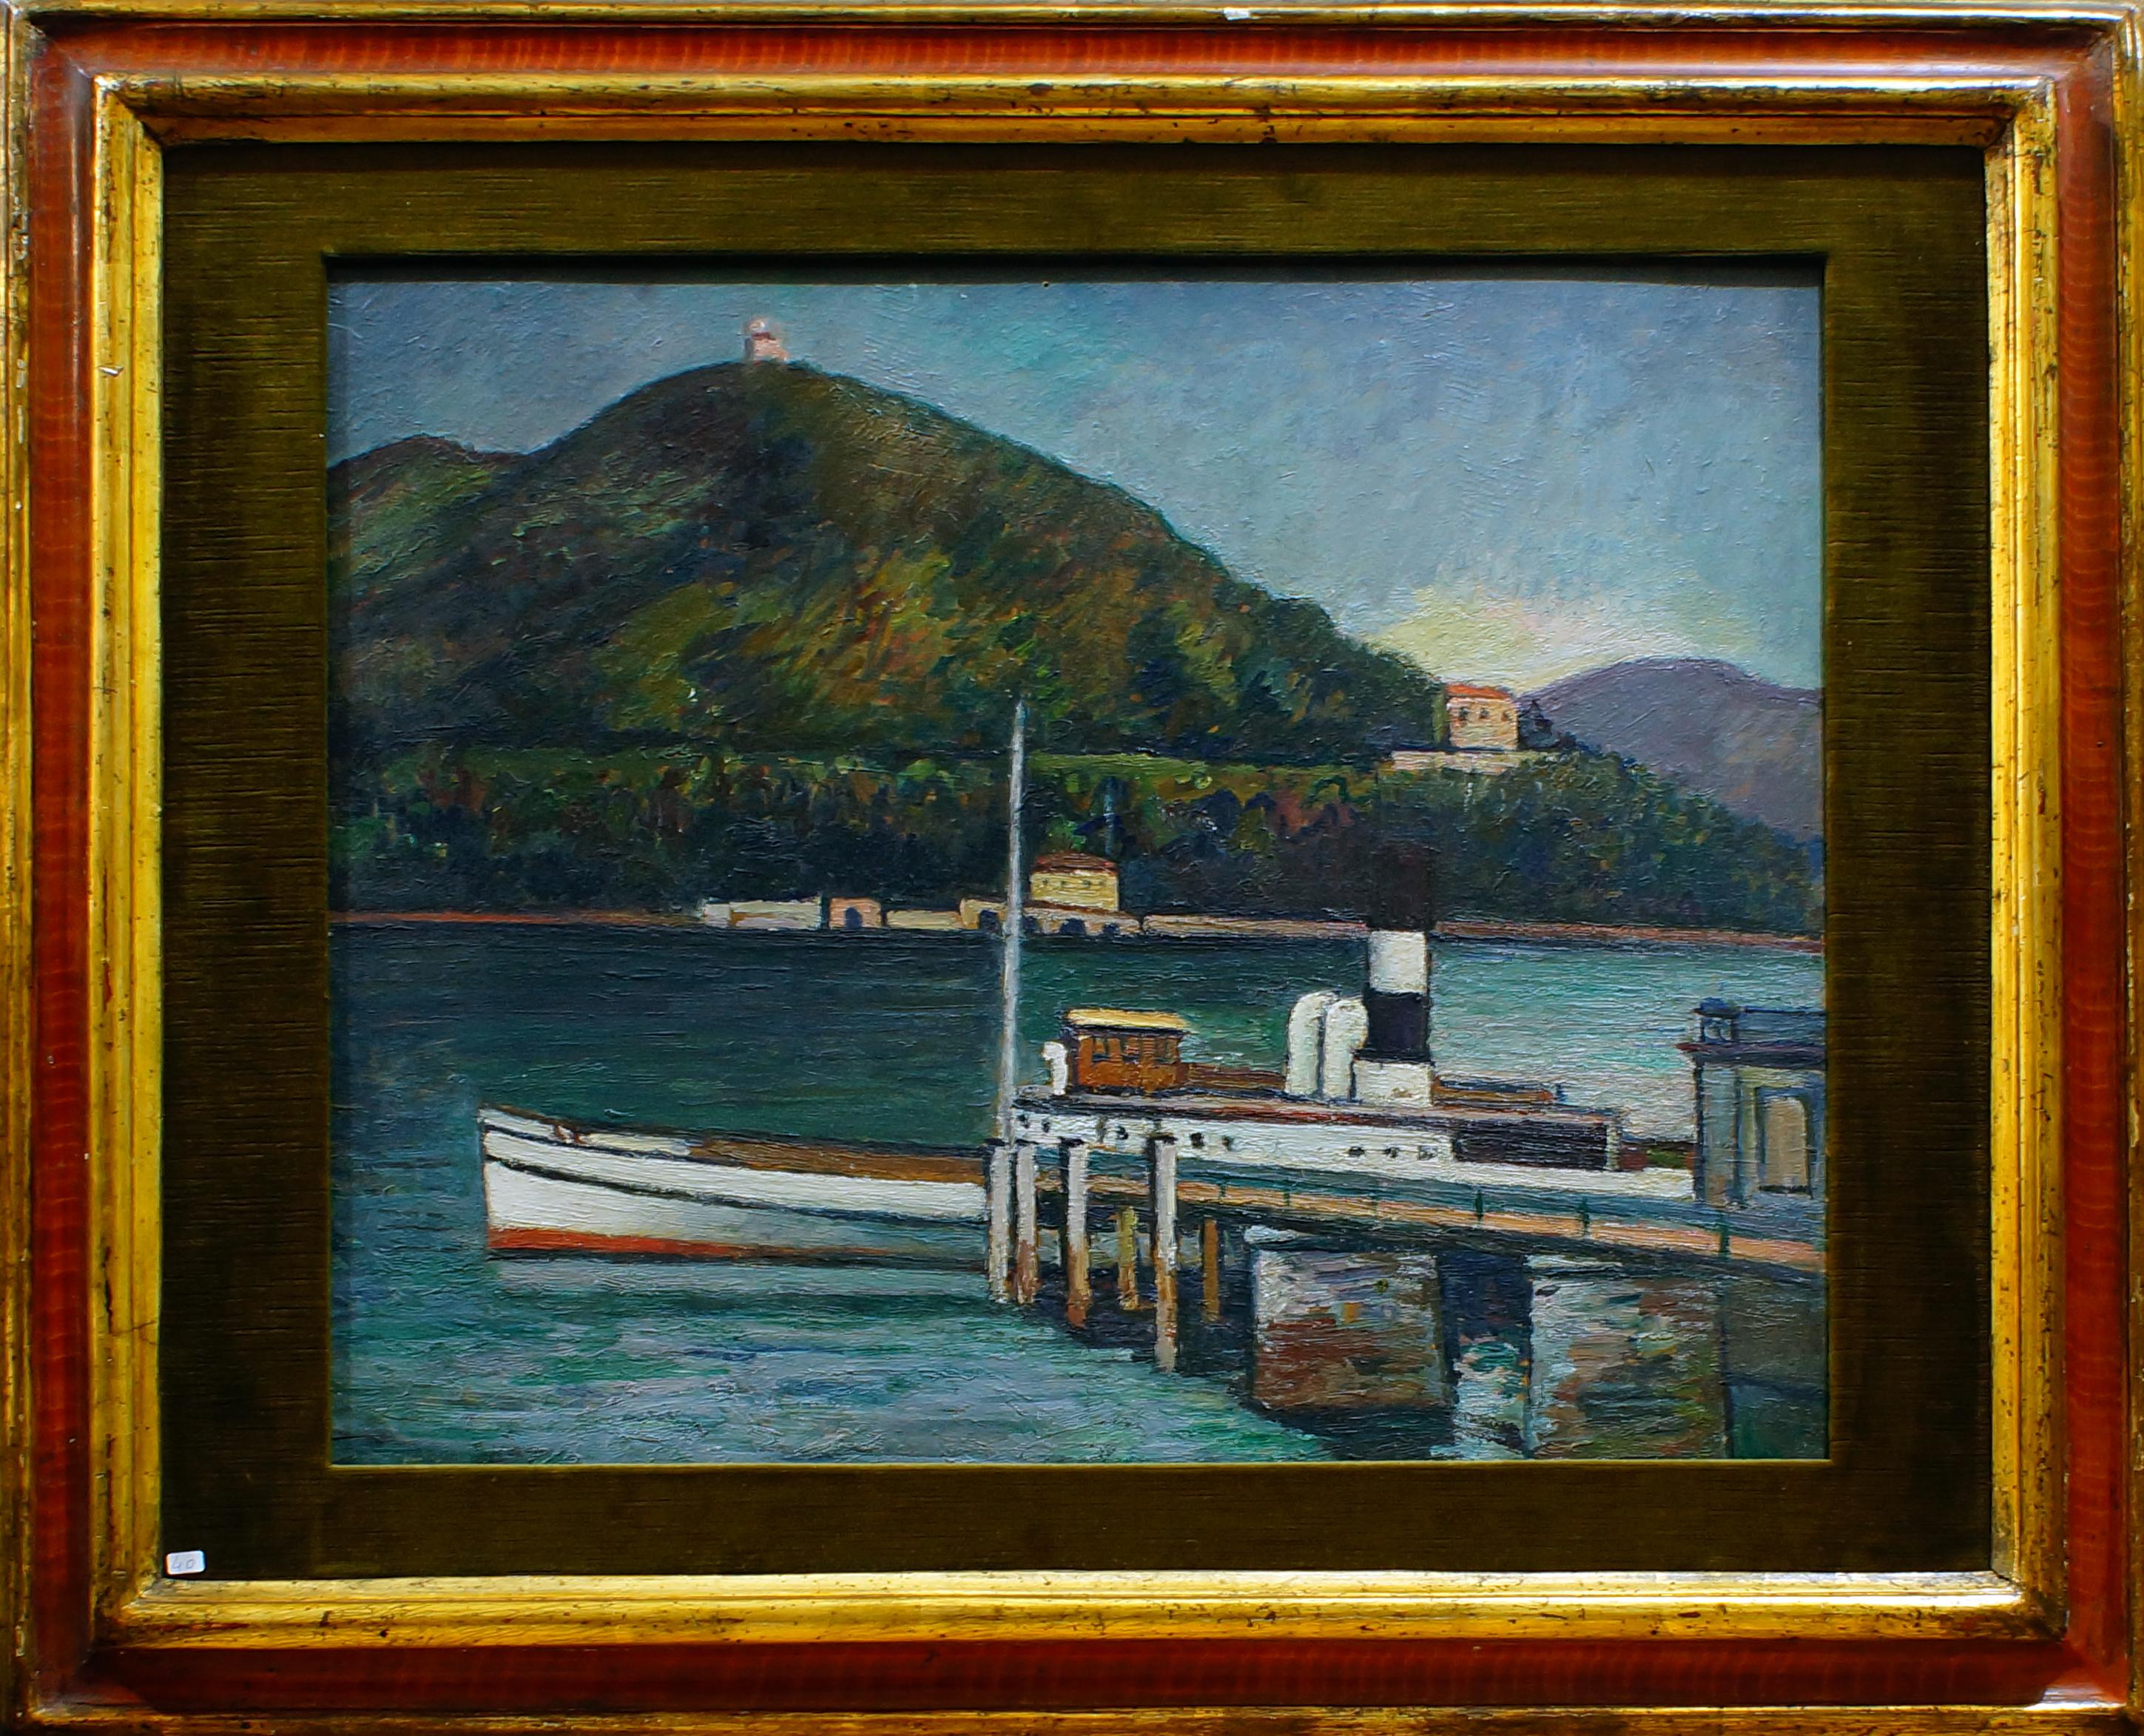 Jetty on the Lake Iseo - Oil on Board by P. Marussig - 1928/30 - Painting by Piero Marussig